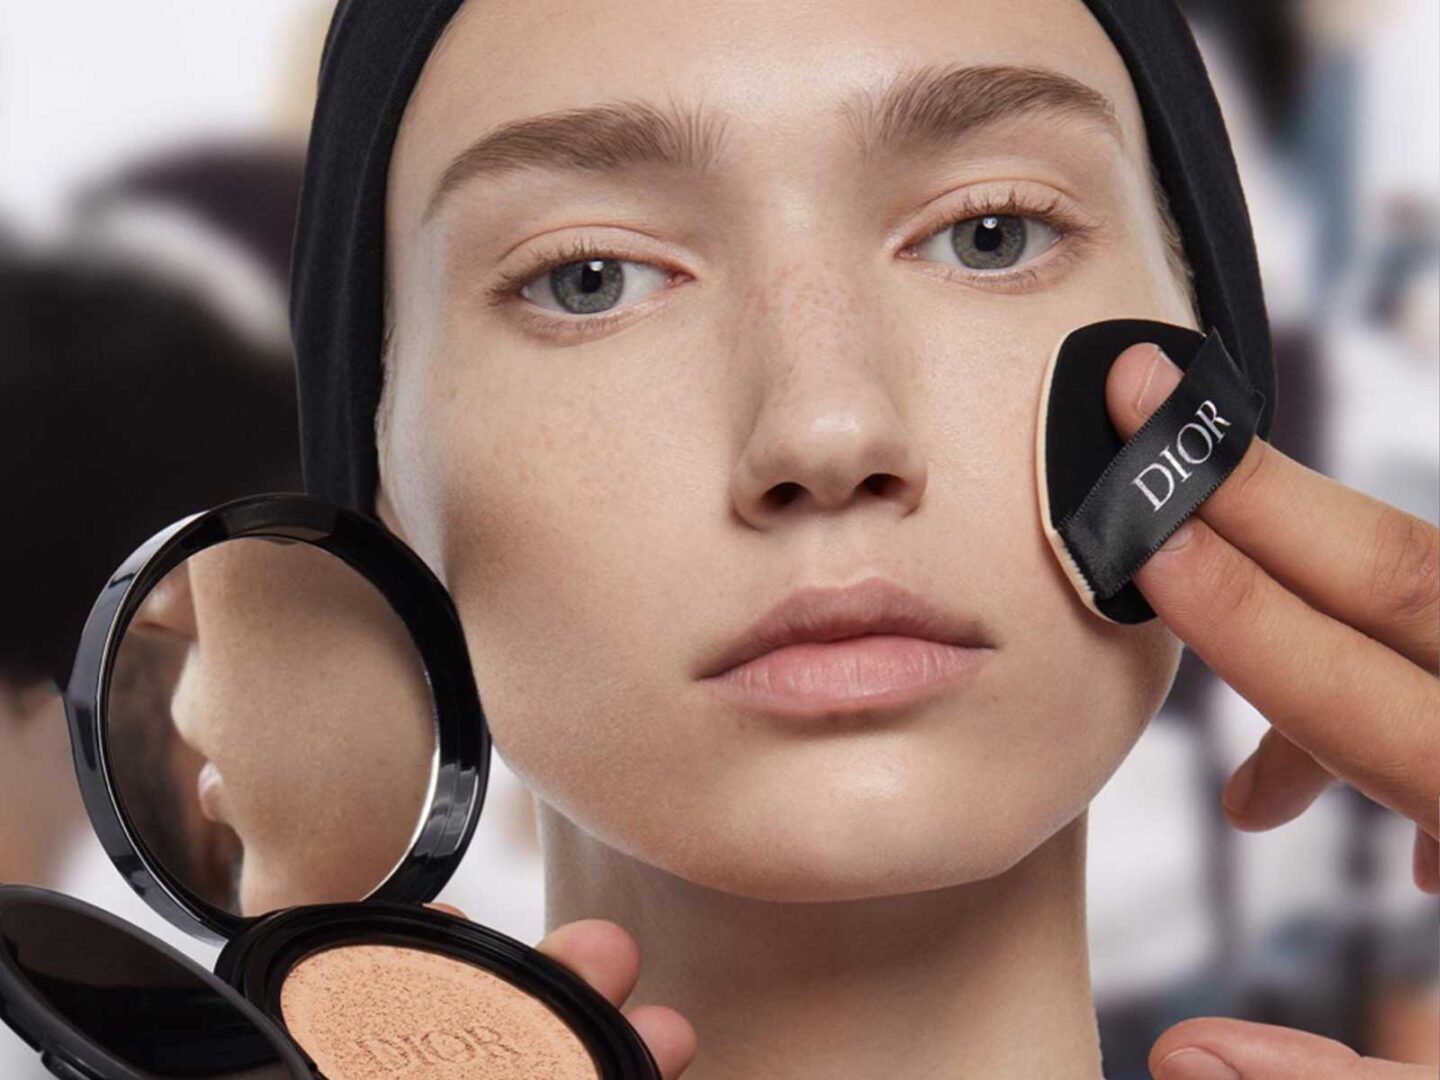 These are the beauty trends seen at Paris Fashion Week